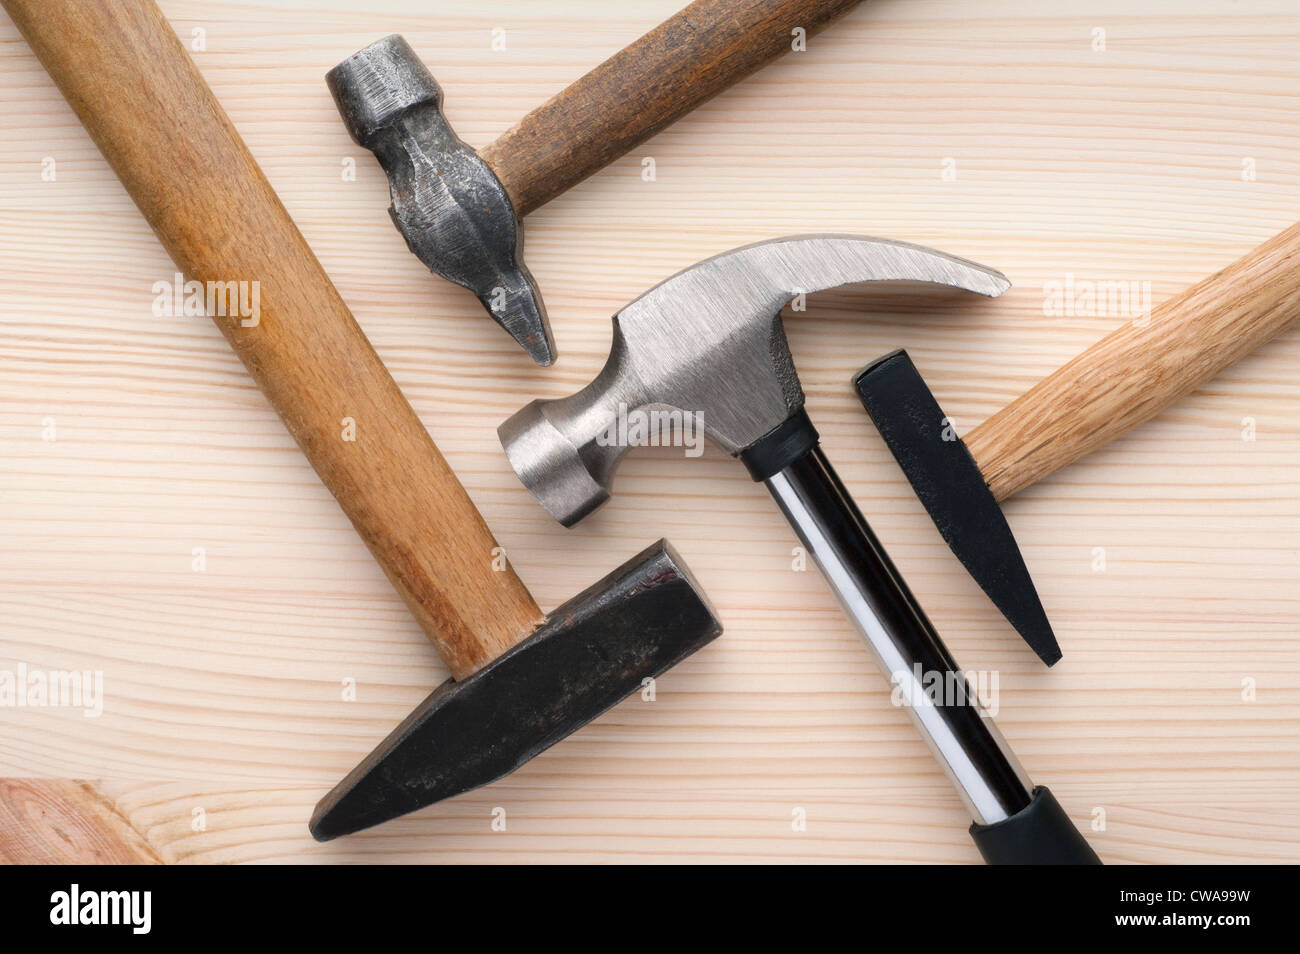 Assorted hammers arranged on a wooden surface. Construction, repair or home improvement background. Stock Photo